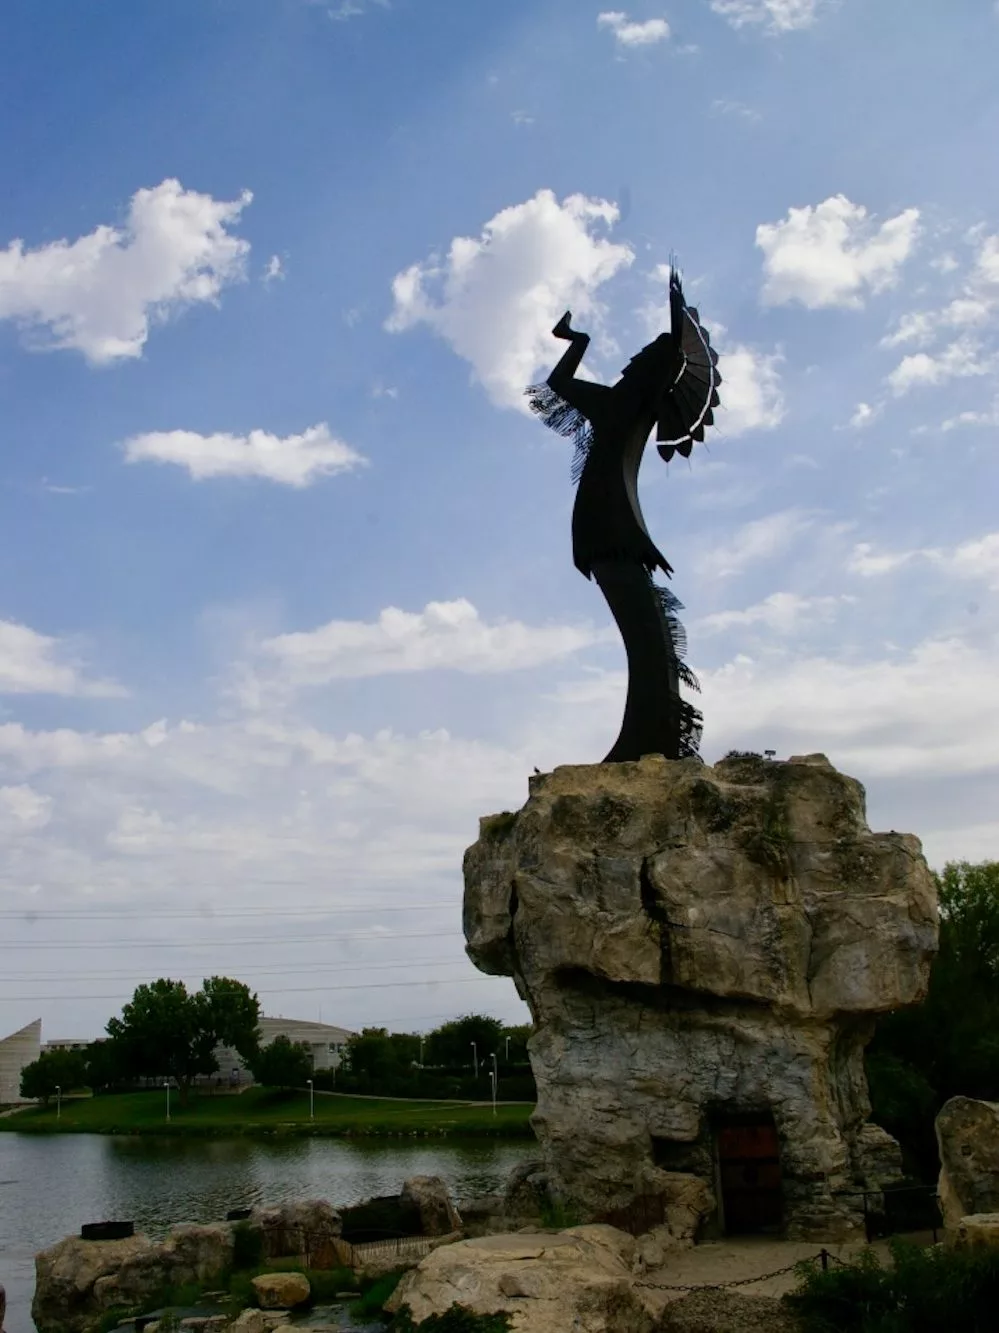 Large metal sculpture of a Native American warrior known as the Keeper of the Plains at the confluence of the Arkansas and Little Arkansas rivers in Wichita, Kansas